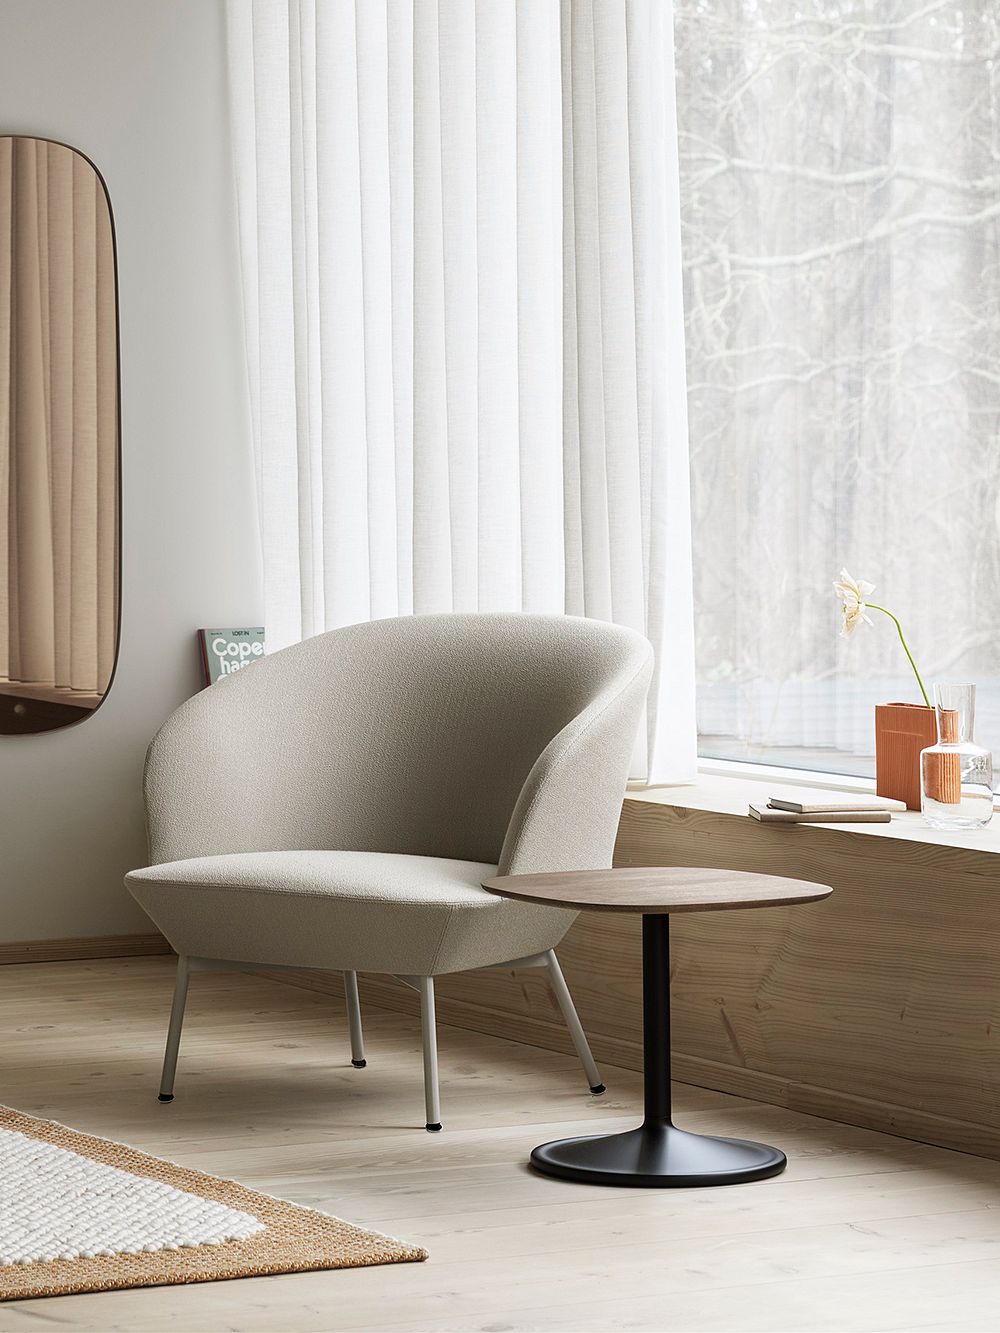 An image of Muuto's Oslo lounge chair and Soft side table as part of the living room decor.